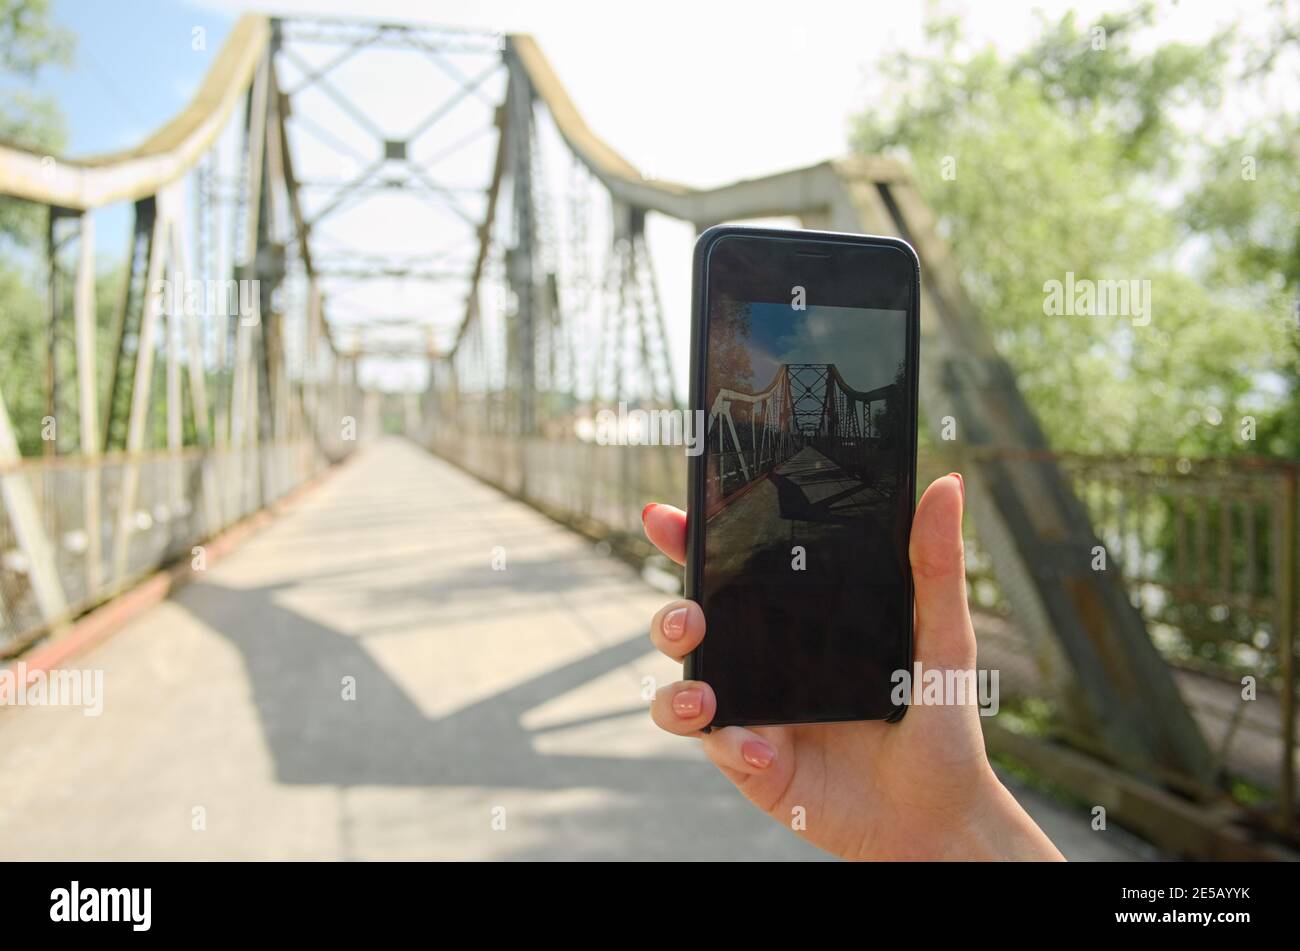 Girl hand holding phone and taking photo of the bridge. Tourist taking picture on cellphone. Stock Photo